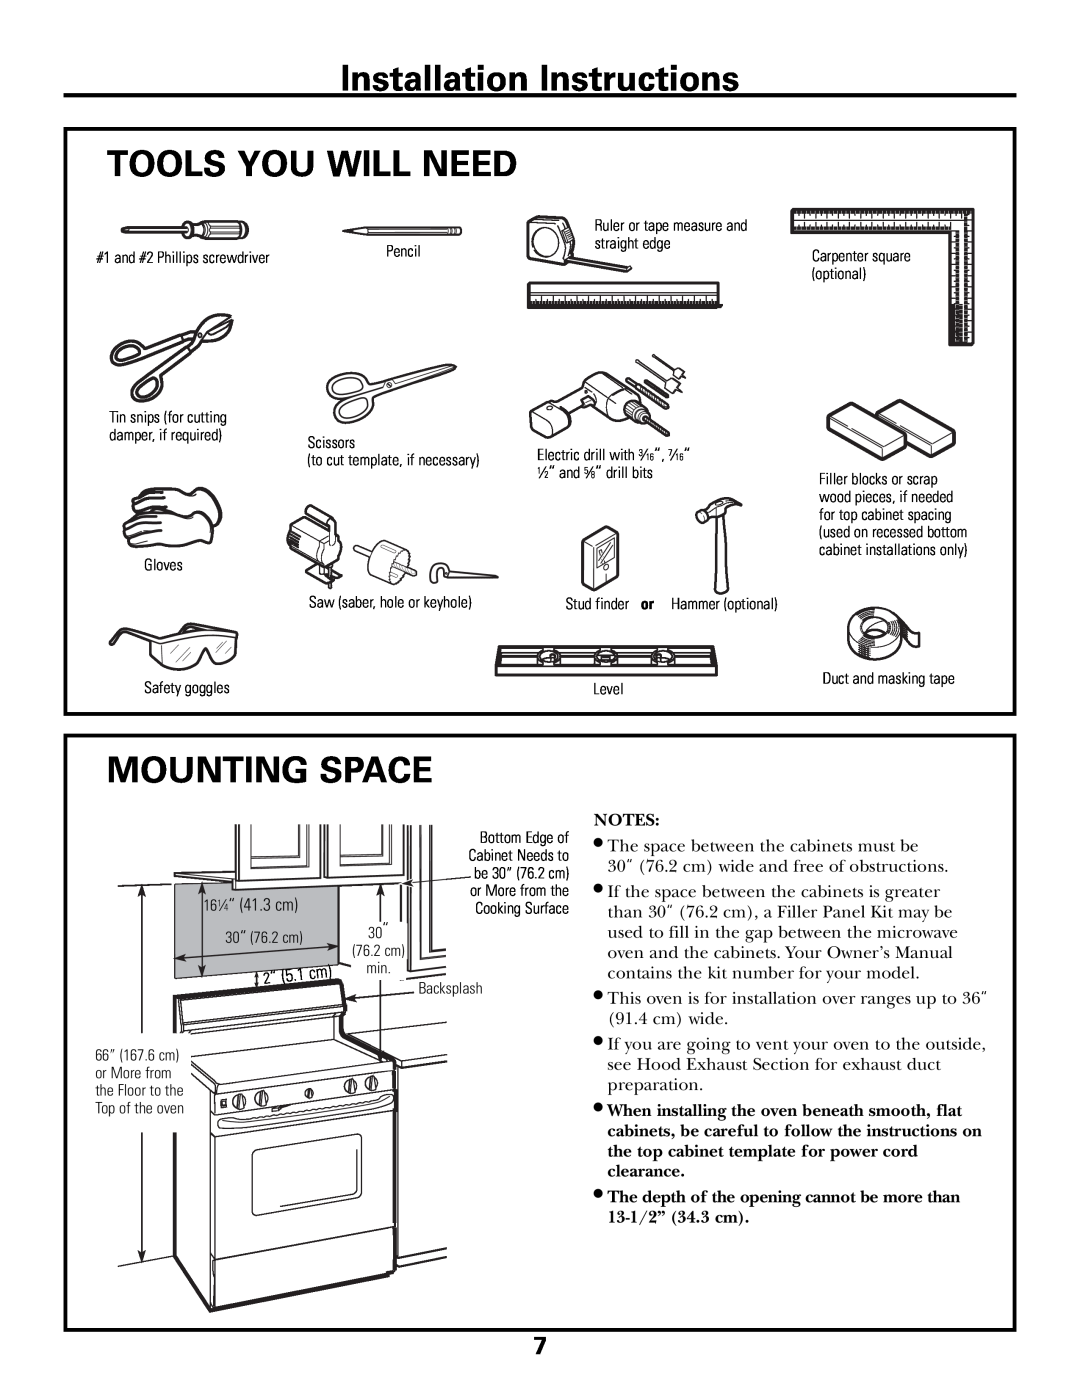 GE JVM1790 installation instructions Installation Instructions TOOLS YOU WILL NEED, Mounting Space 